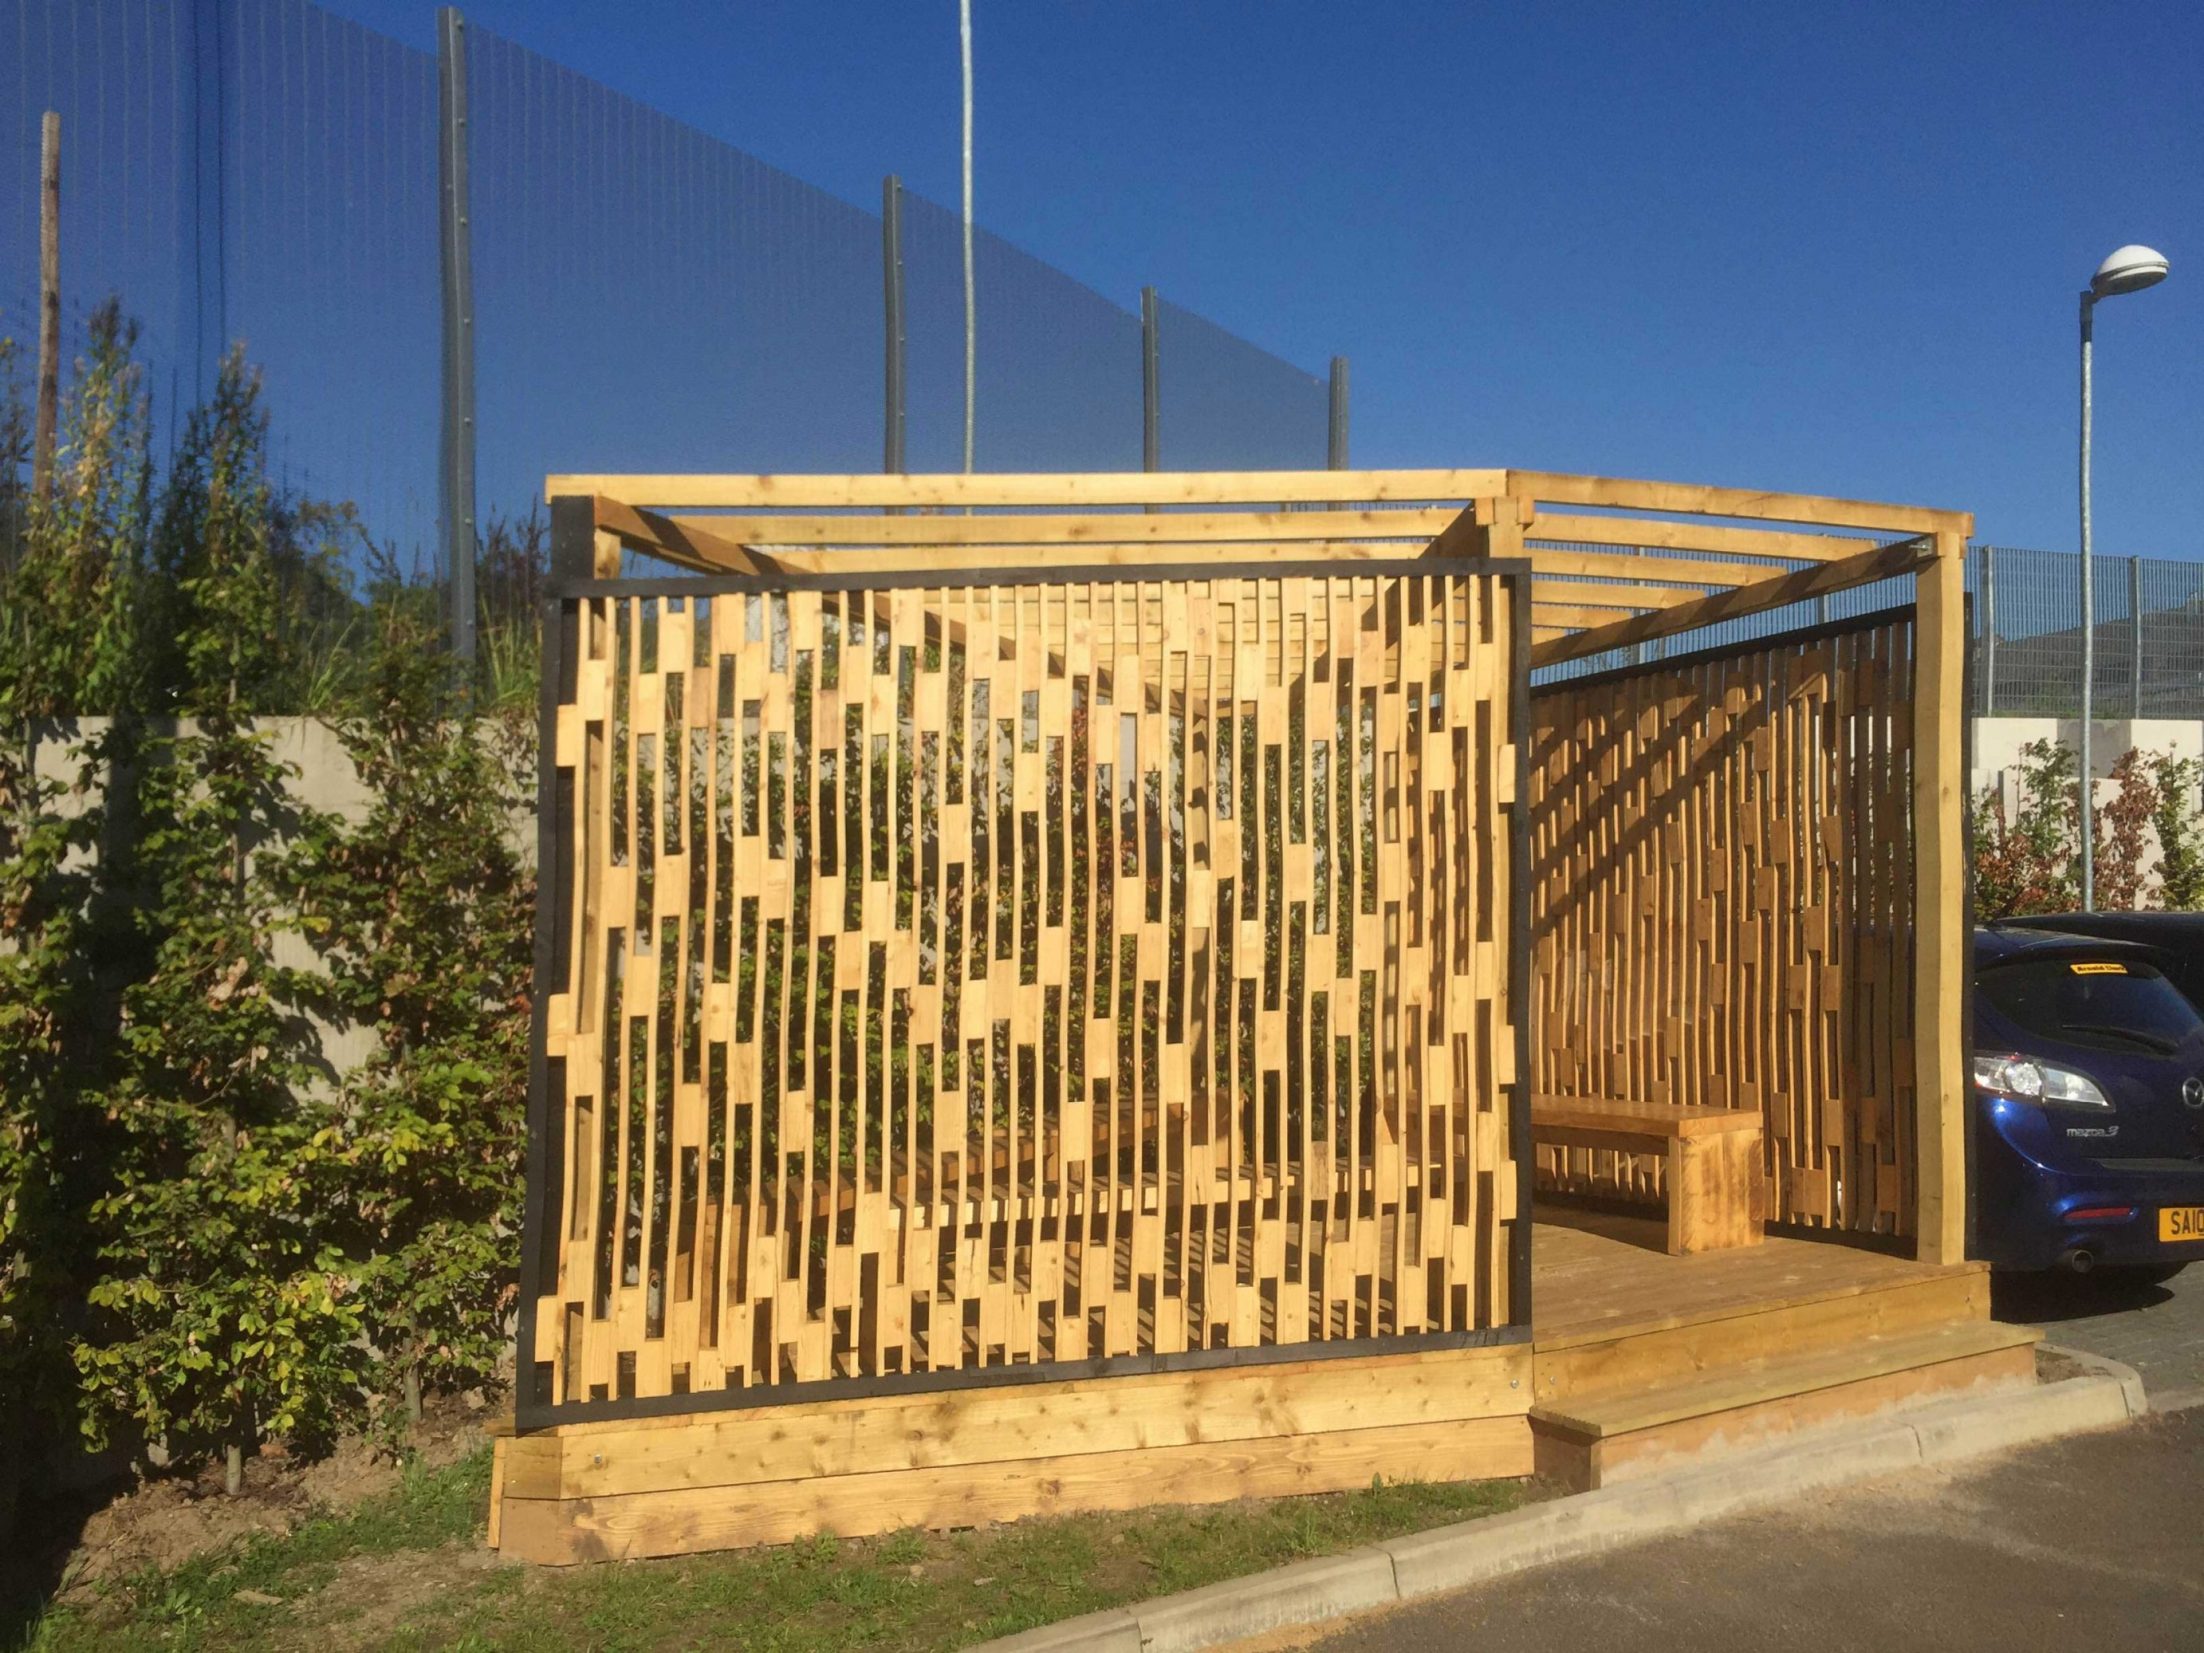 Bespoke pergola with trellis and seating made with reclaimed wood